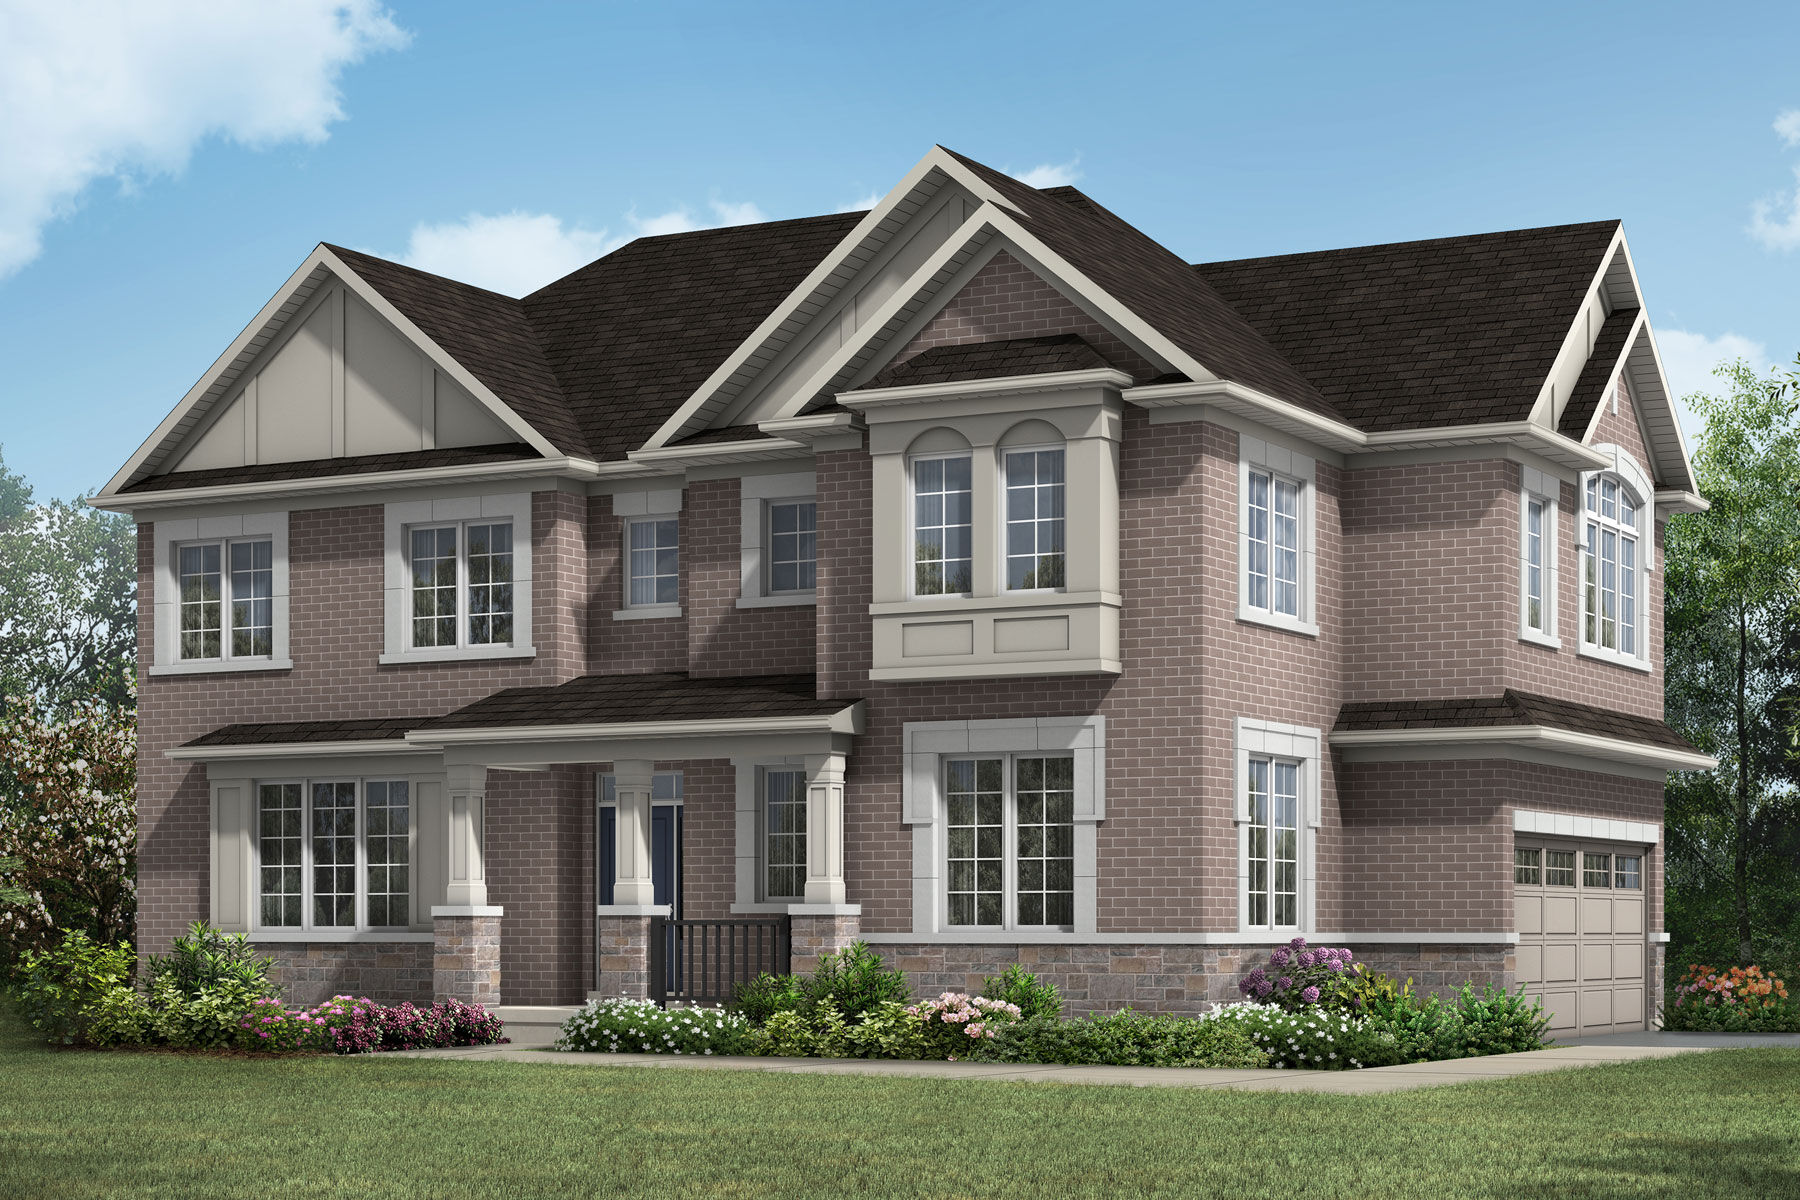  Town Homes with garage, window and exterior brick